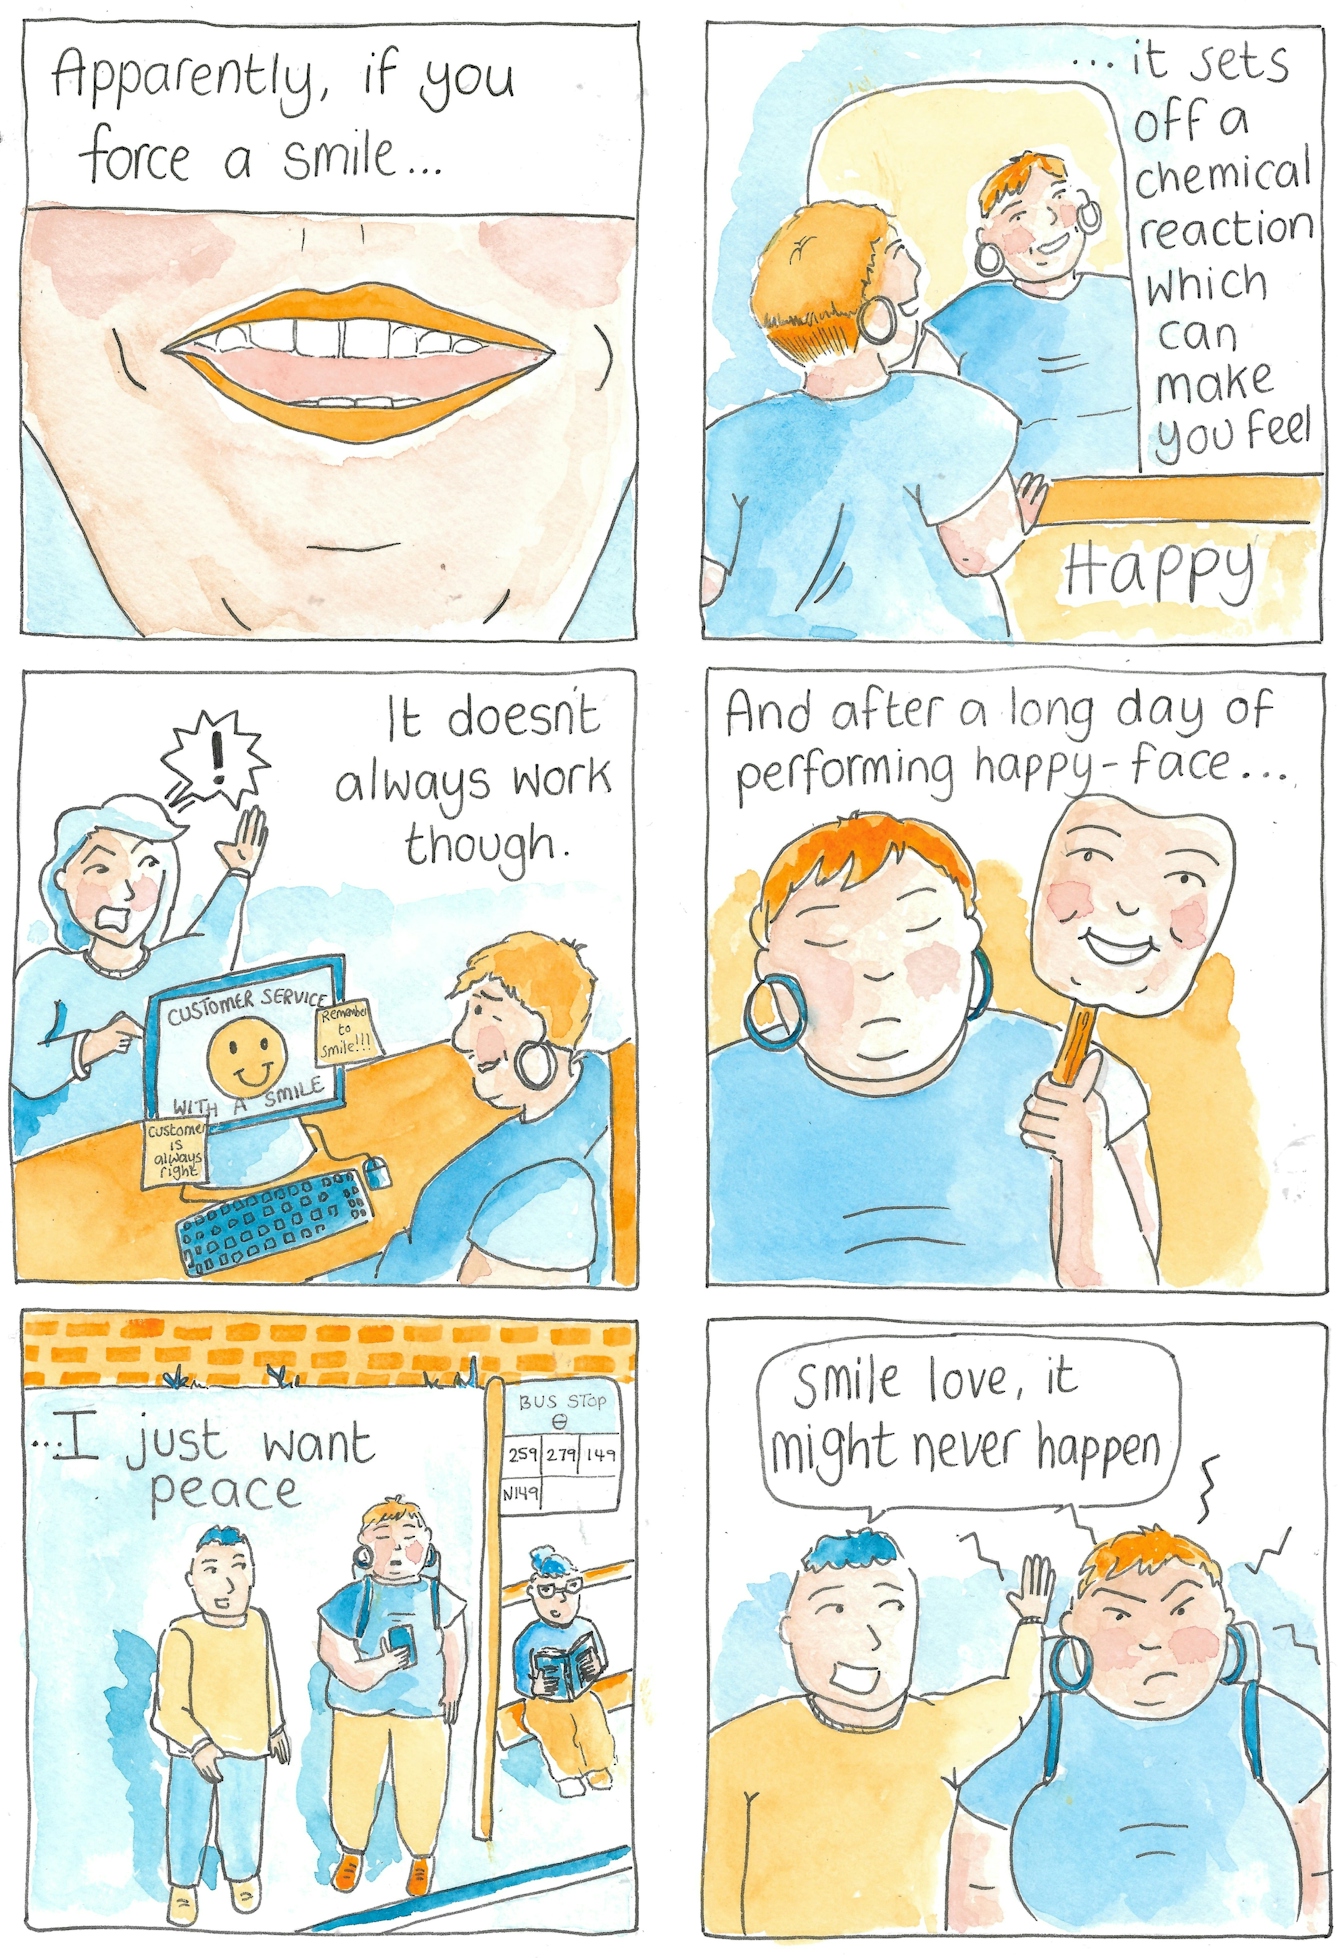 Panel 1 - A close up of someone smiling. The text reads: "Apparently if you force a smile..."

Panel 2 - A girl is smiling at herself in the mirror, the smile looks forced. The text continues "...it sets off  a chemical reaction which can make you feel HAPPY."

Panel 3 - The same girl is now positioned sitting in front of a computer while an angry customer yells at her. The home page on the computer has an illustration of a yellow smiley face with the text 'Customer service with a smile.' Also attached to the computer are post-it notes reading 'remember to smile!!!' and 'Customer is always right.' The caption continues: "It doesn't always work though."

Panel 4 - The girl has removed a mask of a smiling face to reveal her natural face which appears to be frowning. The caption continues "And after a long day of performing happy-face..."

Panel 5 - Girl is stood at a bus stop scrolling through her phone. A man moves into her personal space. The caption continues "...I just want peace."

Panel 6 - The man leans in with a grin and exclaims "smile love, it might never happen" while the girl seethes.